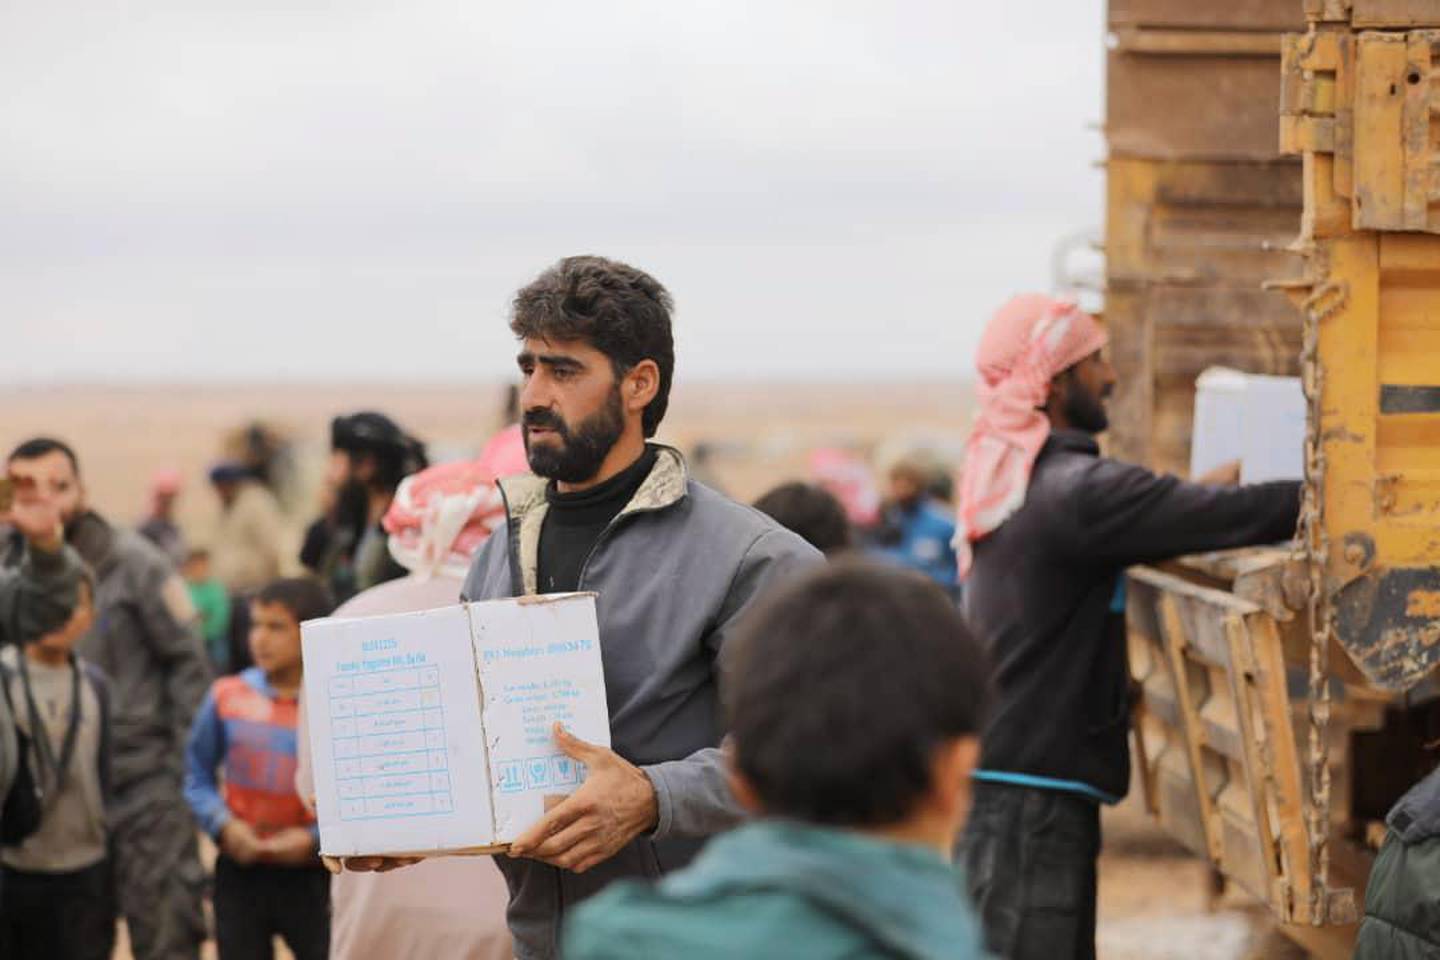 epa07147918 A handout photo made available by Syrian Arabic Red Crescent (SARC) showing a man carrying a box of humanitarian aid distributed by SARC at al-Rukban Camp near the Jordanian border, south-east Syria, 07 November 2018. According to the UN, an operation to deliver humanitarian assistance to 50,000 people in need at Rukban camp in south-east Syria started on 04 November and is expected to take up to four days, the first of kind since the last UN delivery in January 2018, delivered through Jordan.  EPA/SARC HANDOUT  HANDOUT EDITORIAL USE ONLY/NO SALES